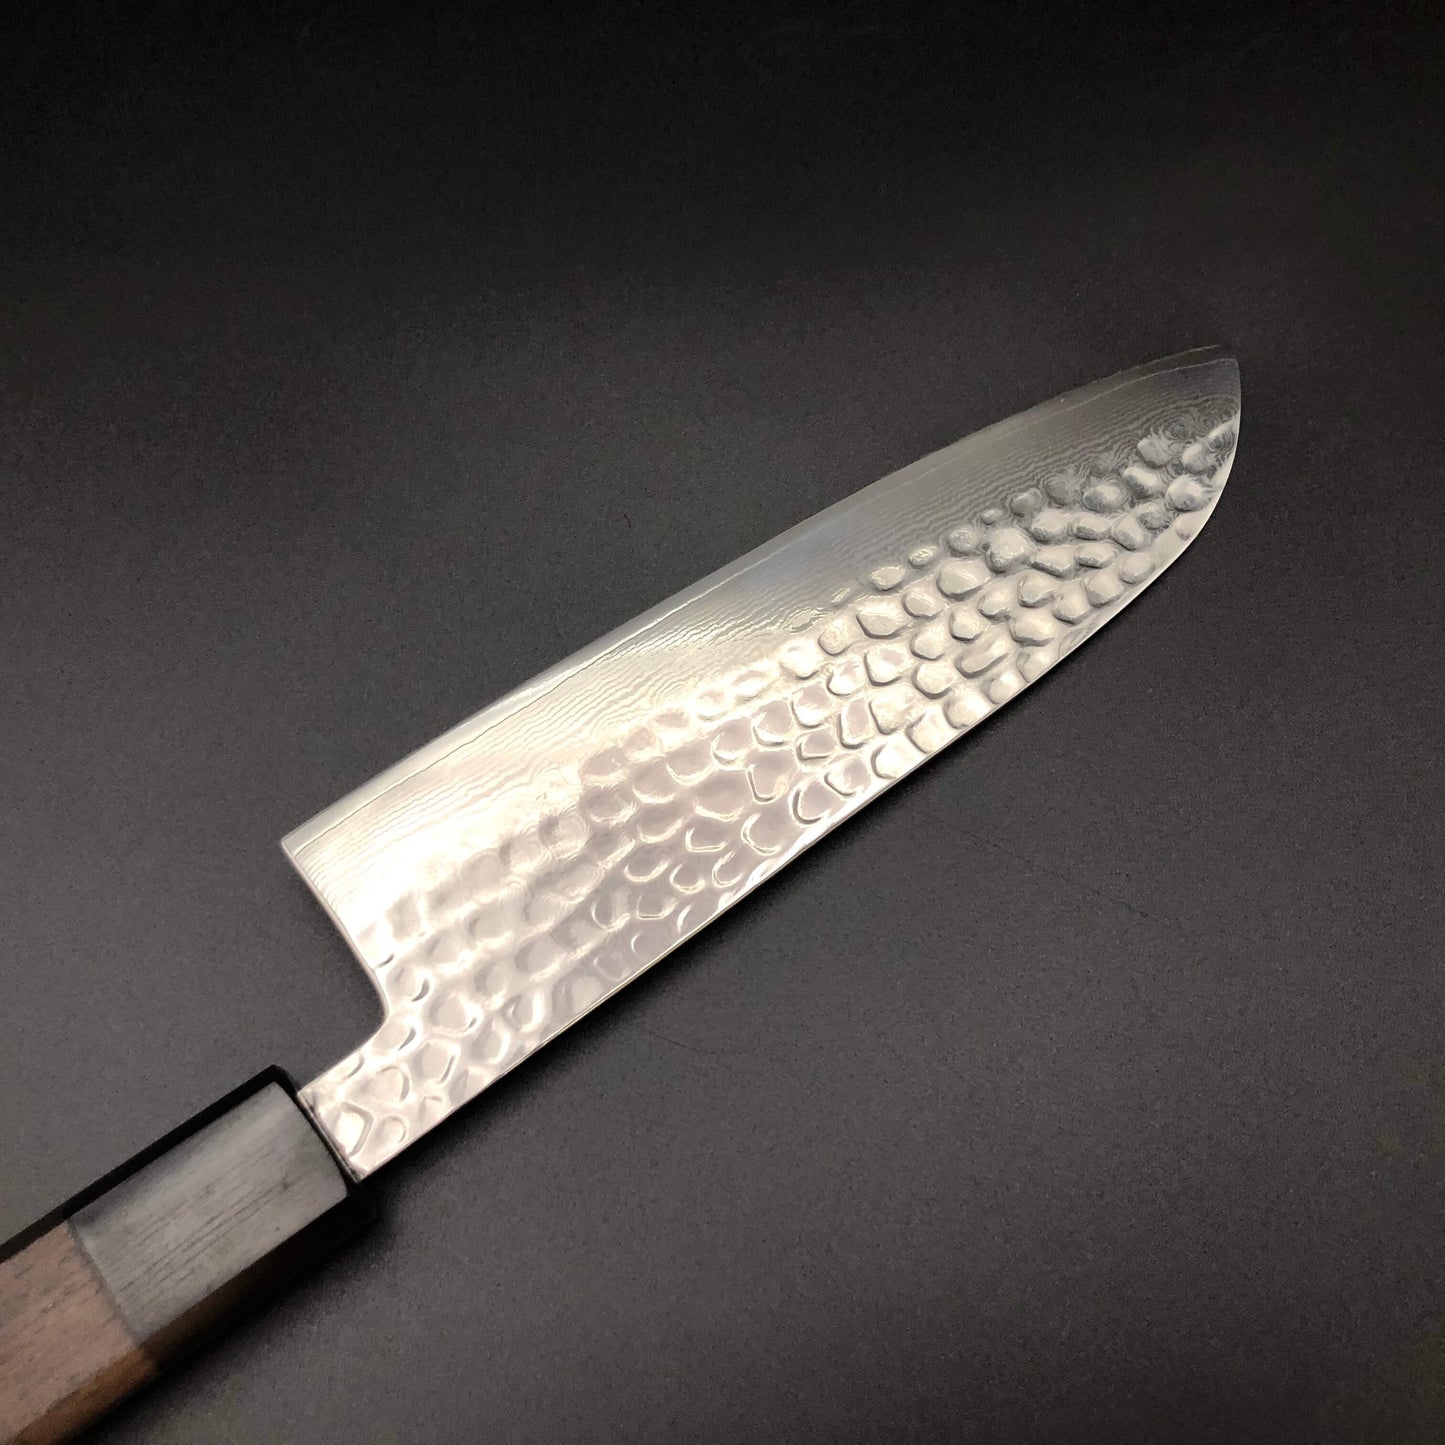 Stainless‐clad Santoku 170㎜ VG10 Steel Damascus 69 layer Rosewood Handle